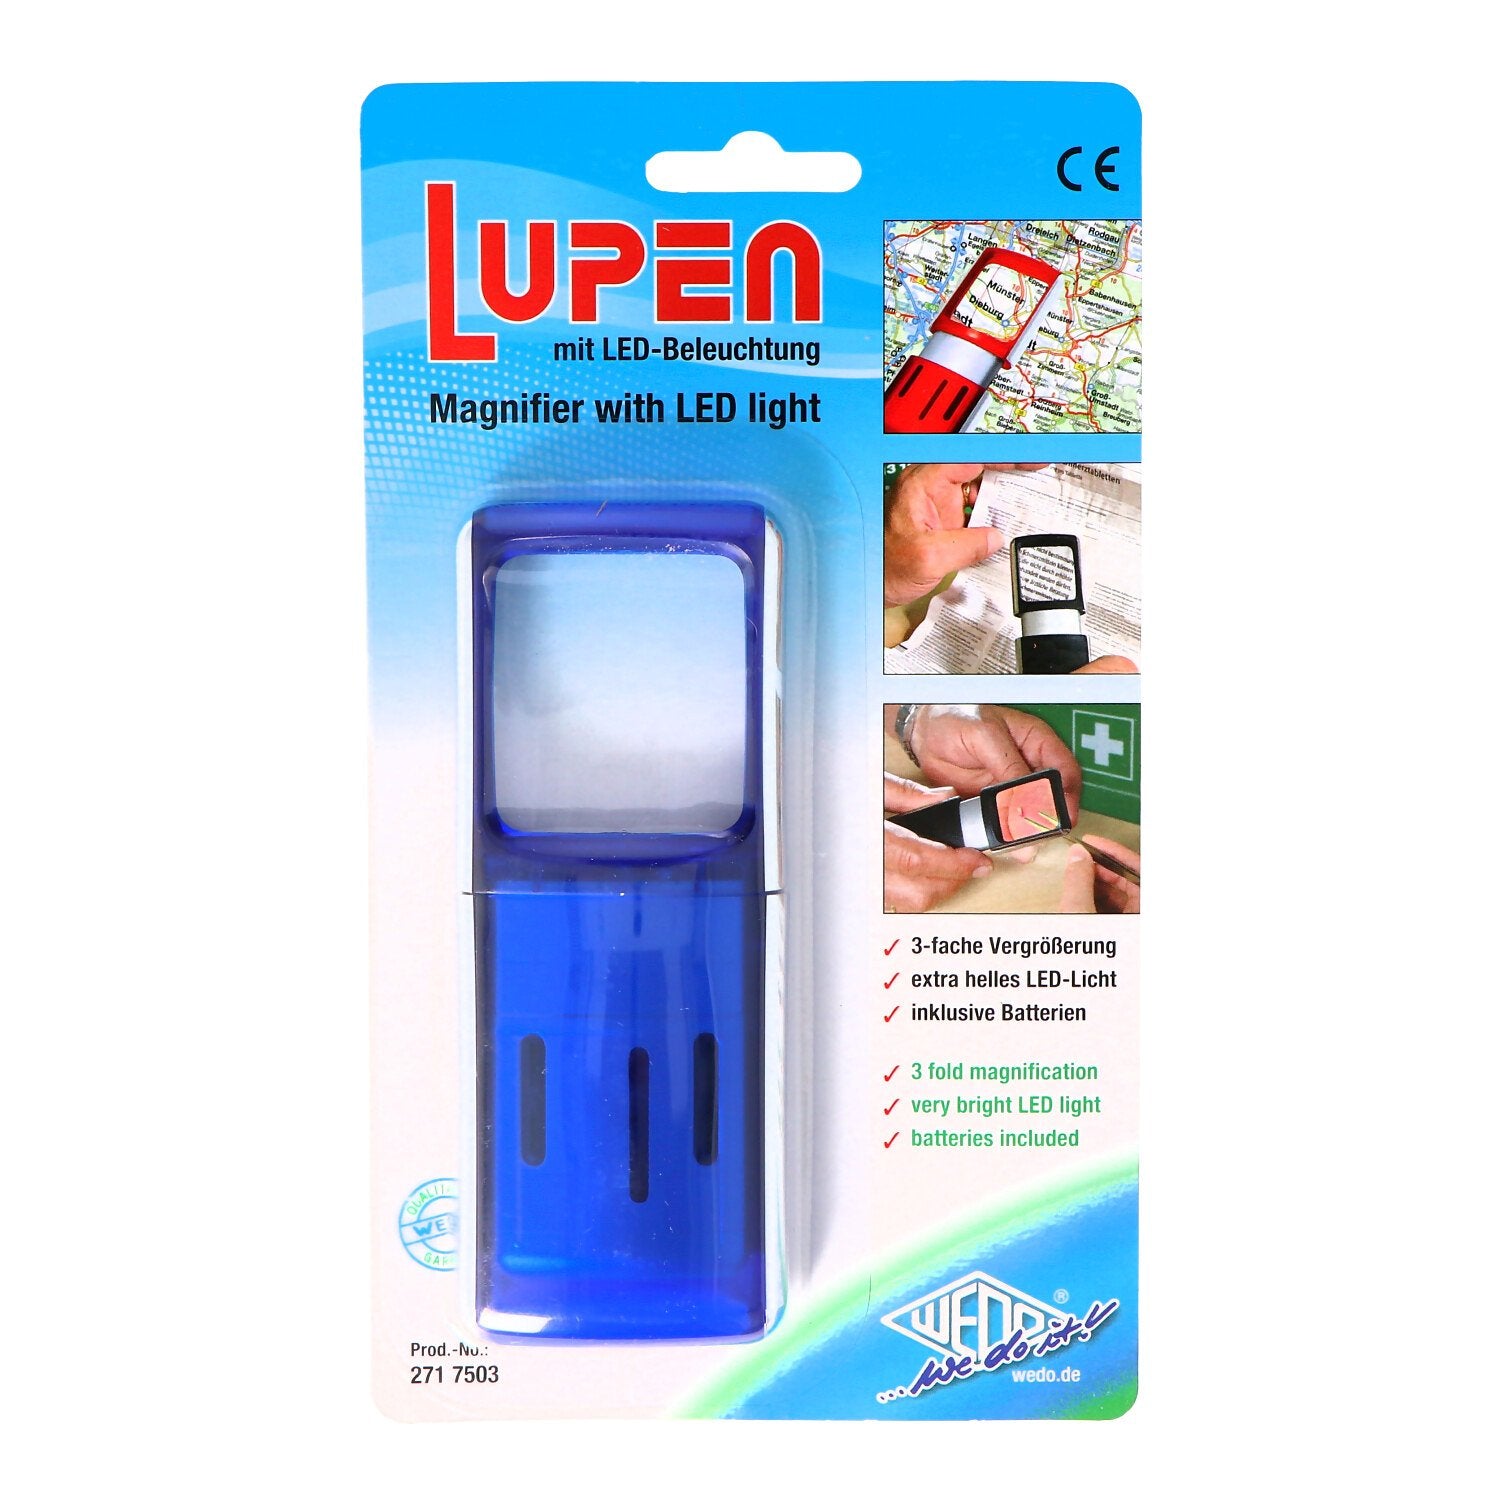 Magnifying glass with LED lighting and 3x magnification, color blue, in blister packaging